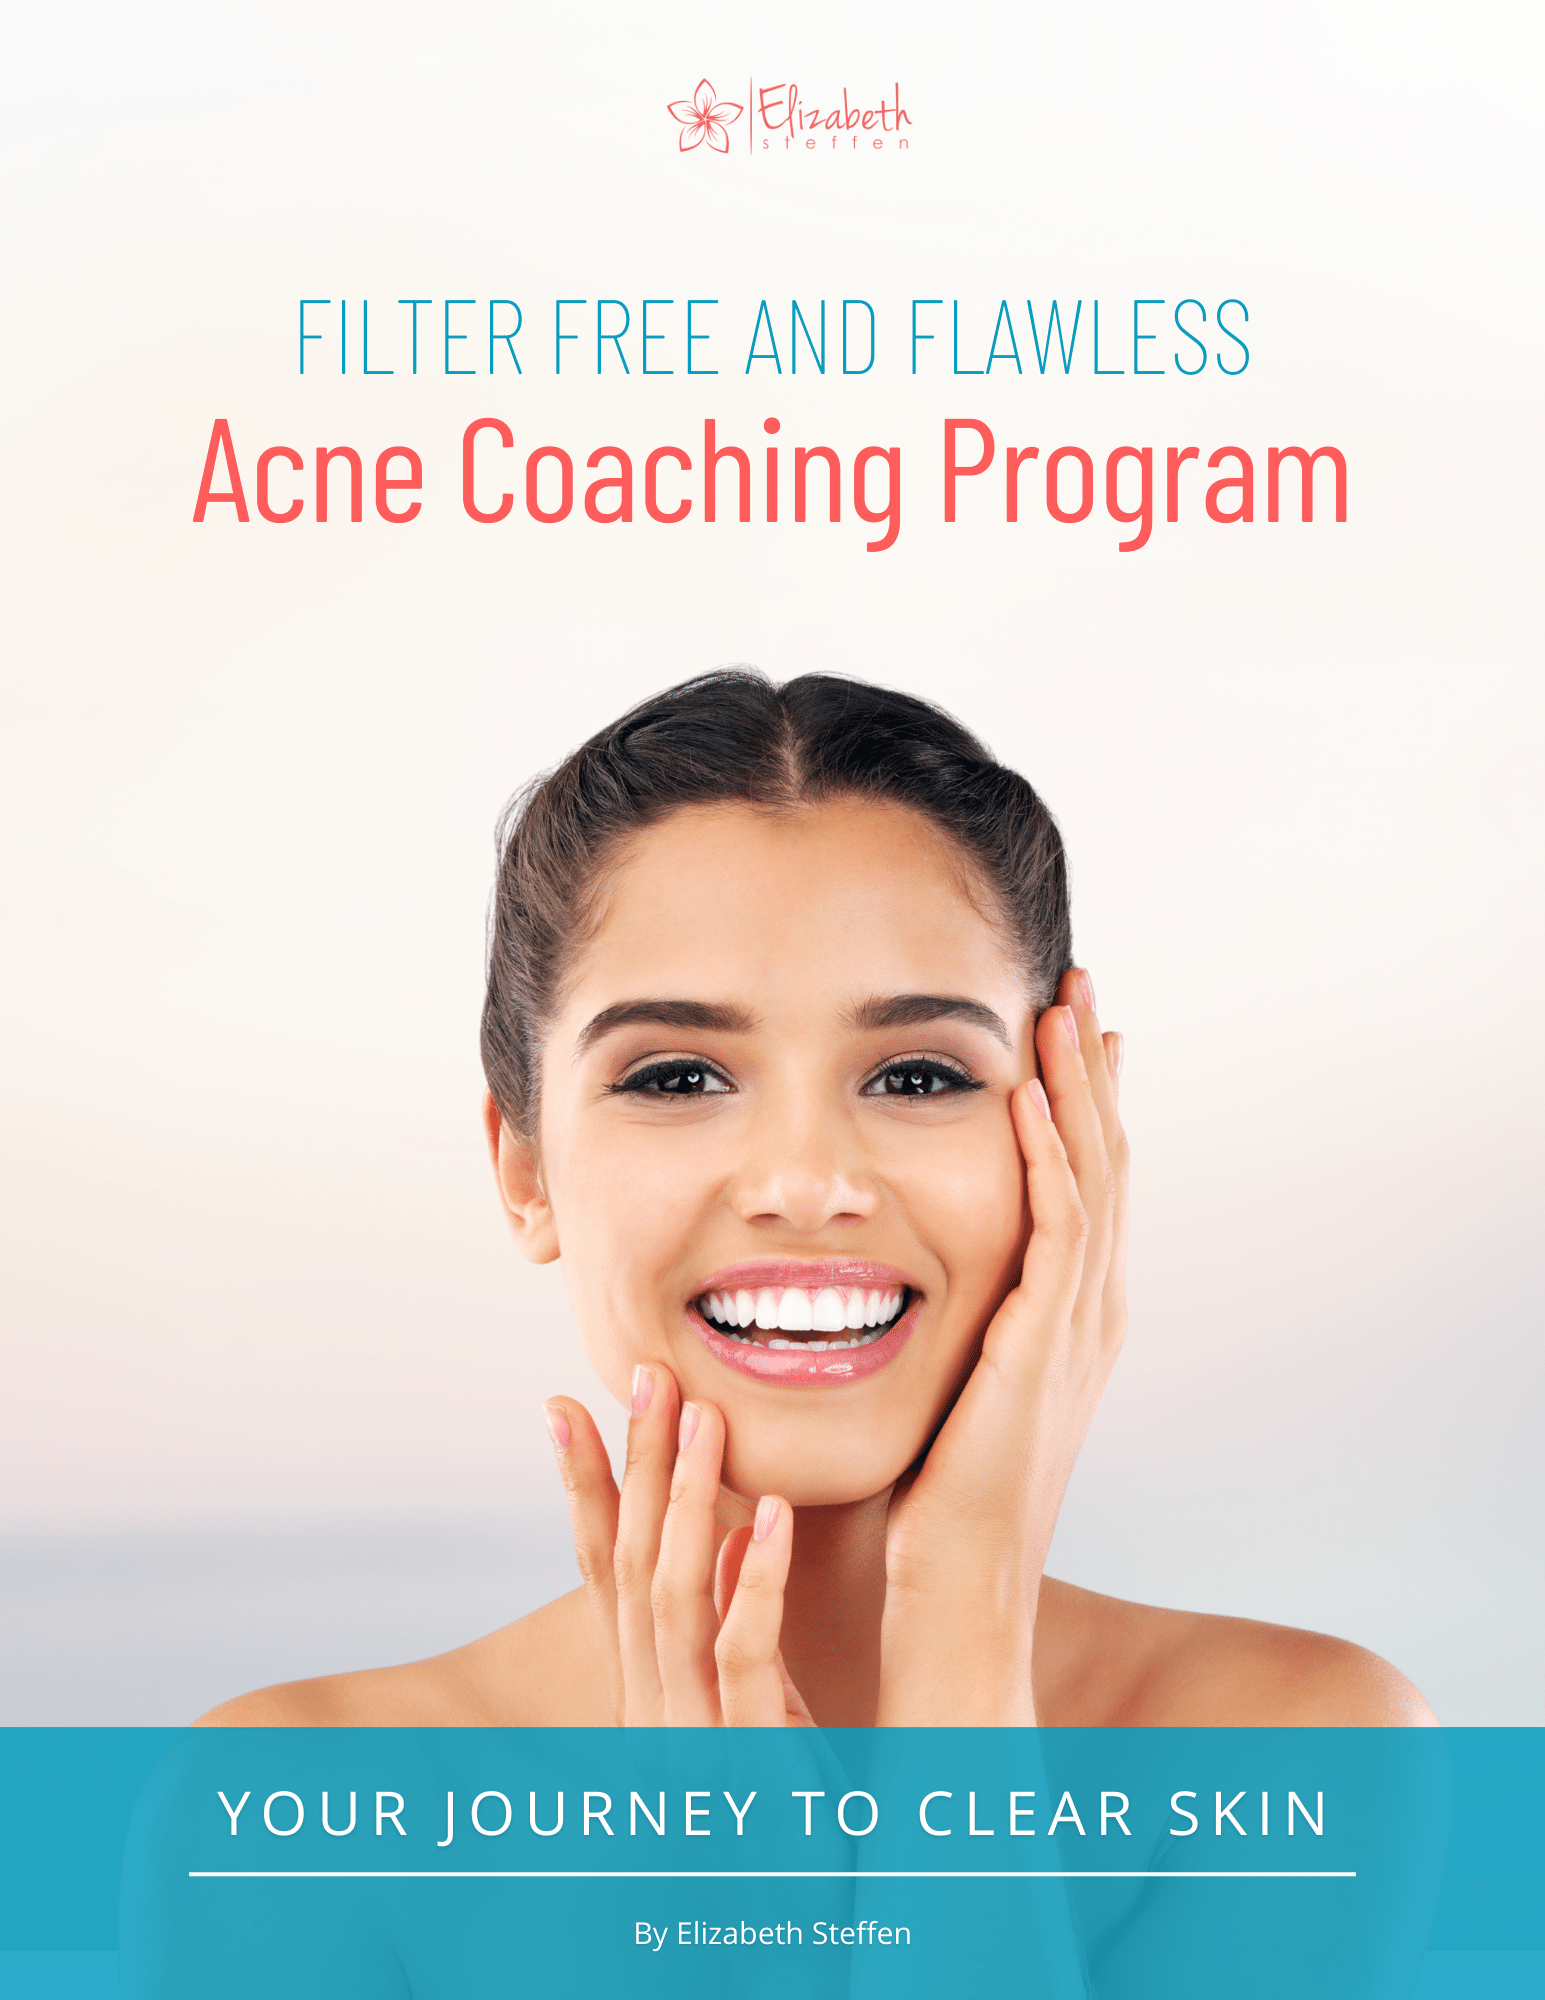 The Filter Free & Flawless Acne Coaching Program